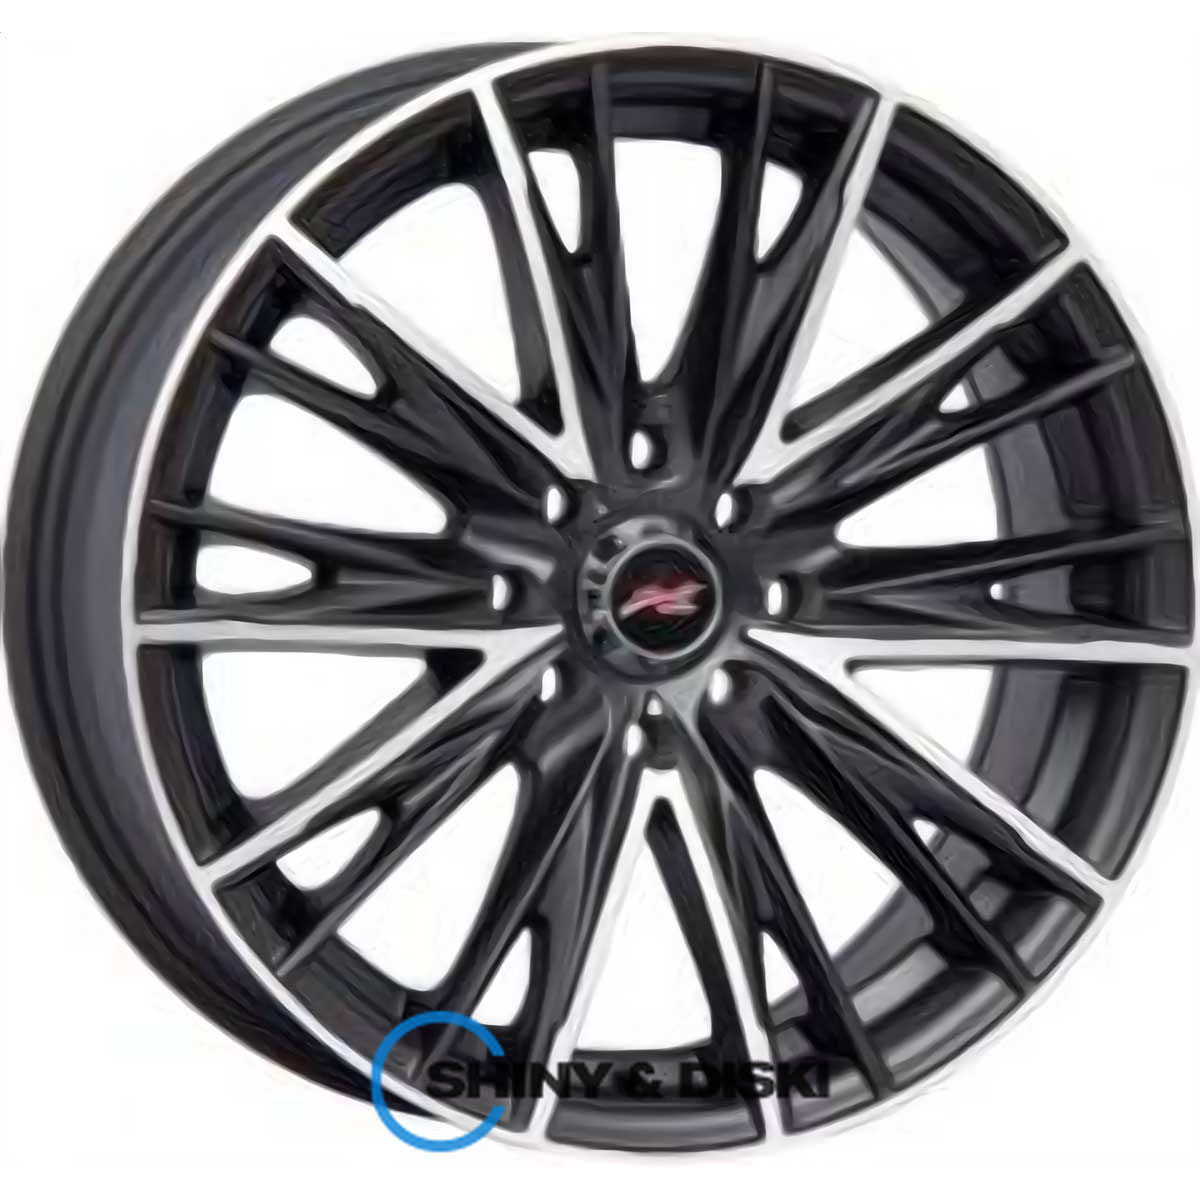 rs tuning 1047 mbmf r16 w7 pcd4x100/114.3 et40 dia73.1